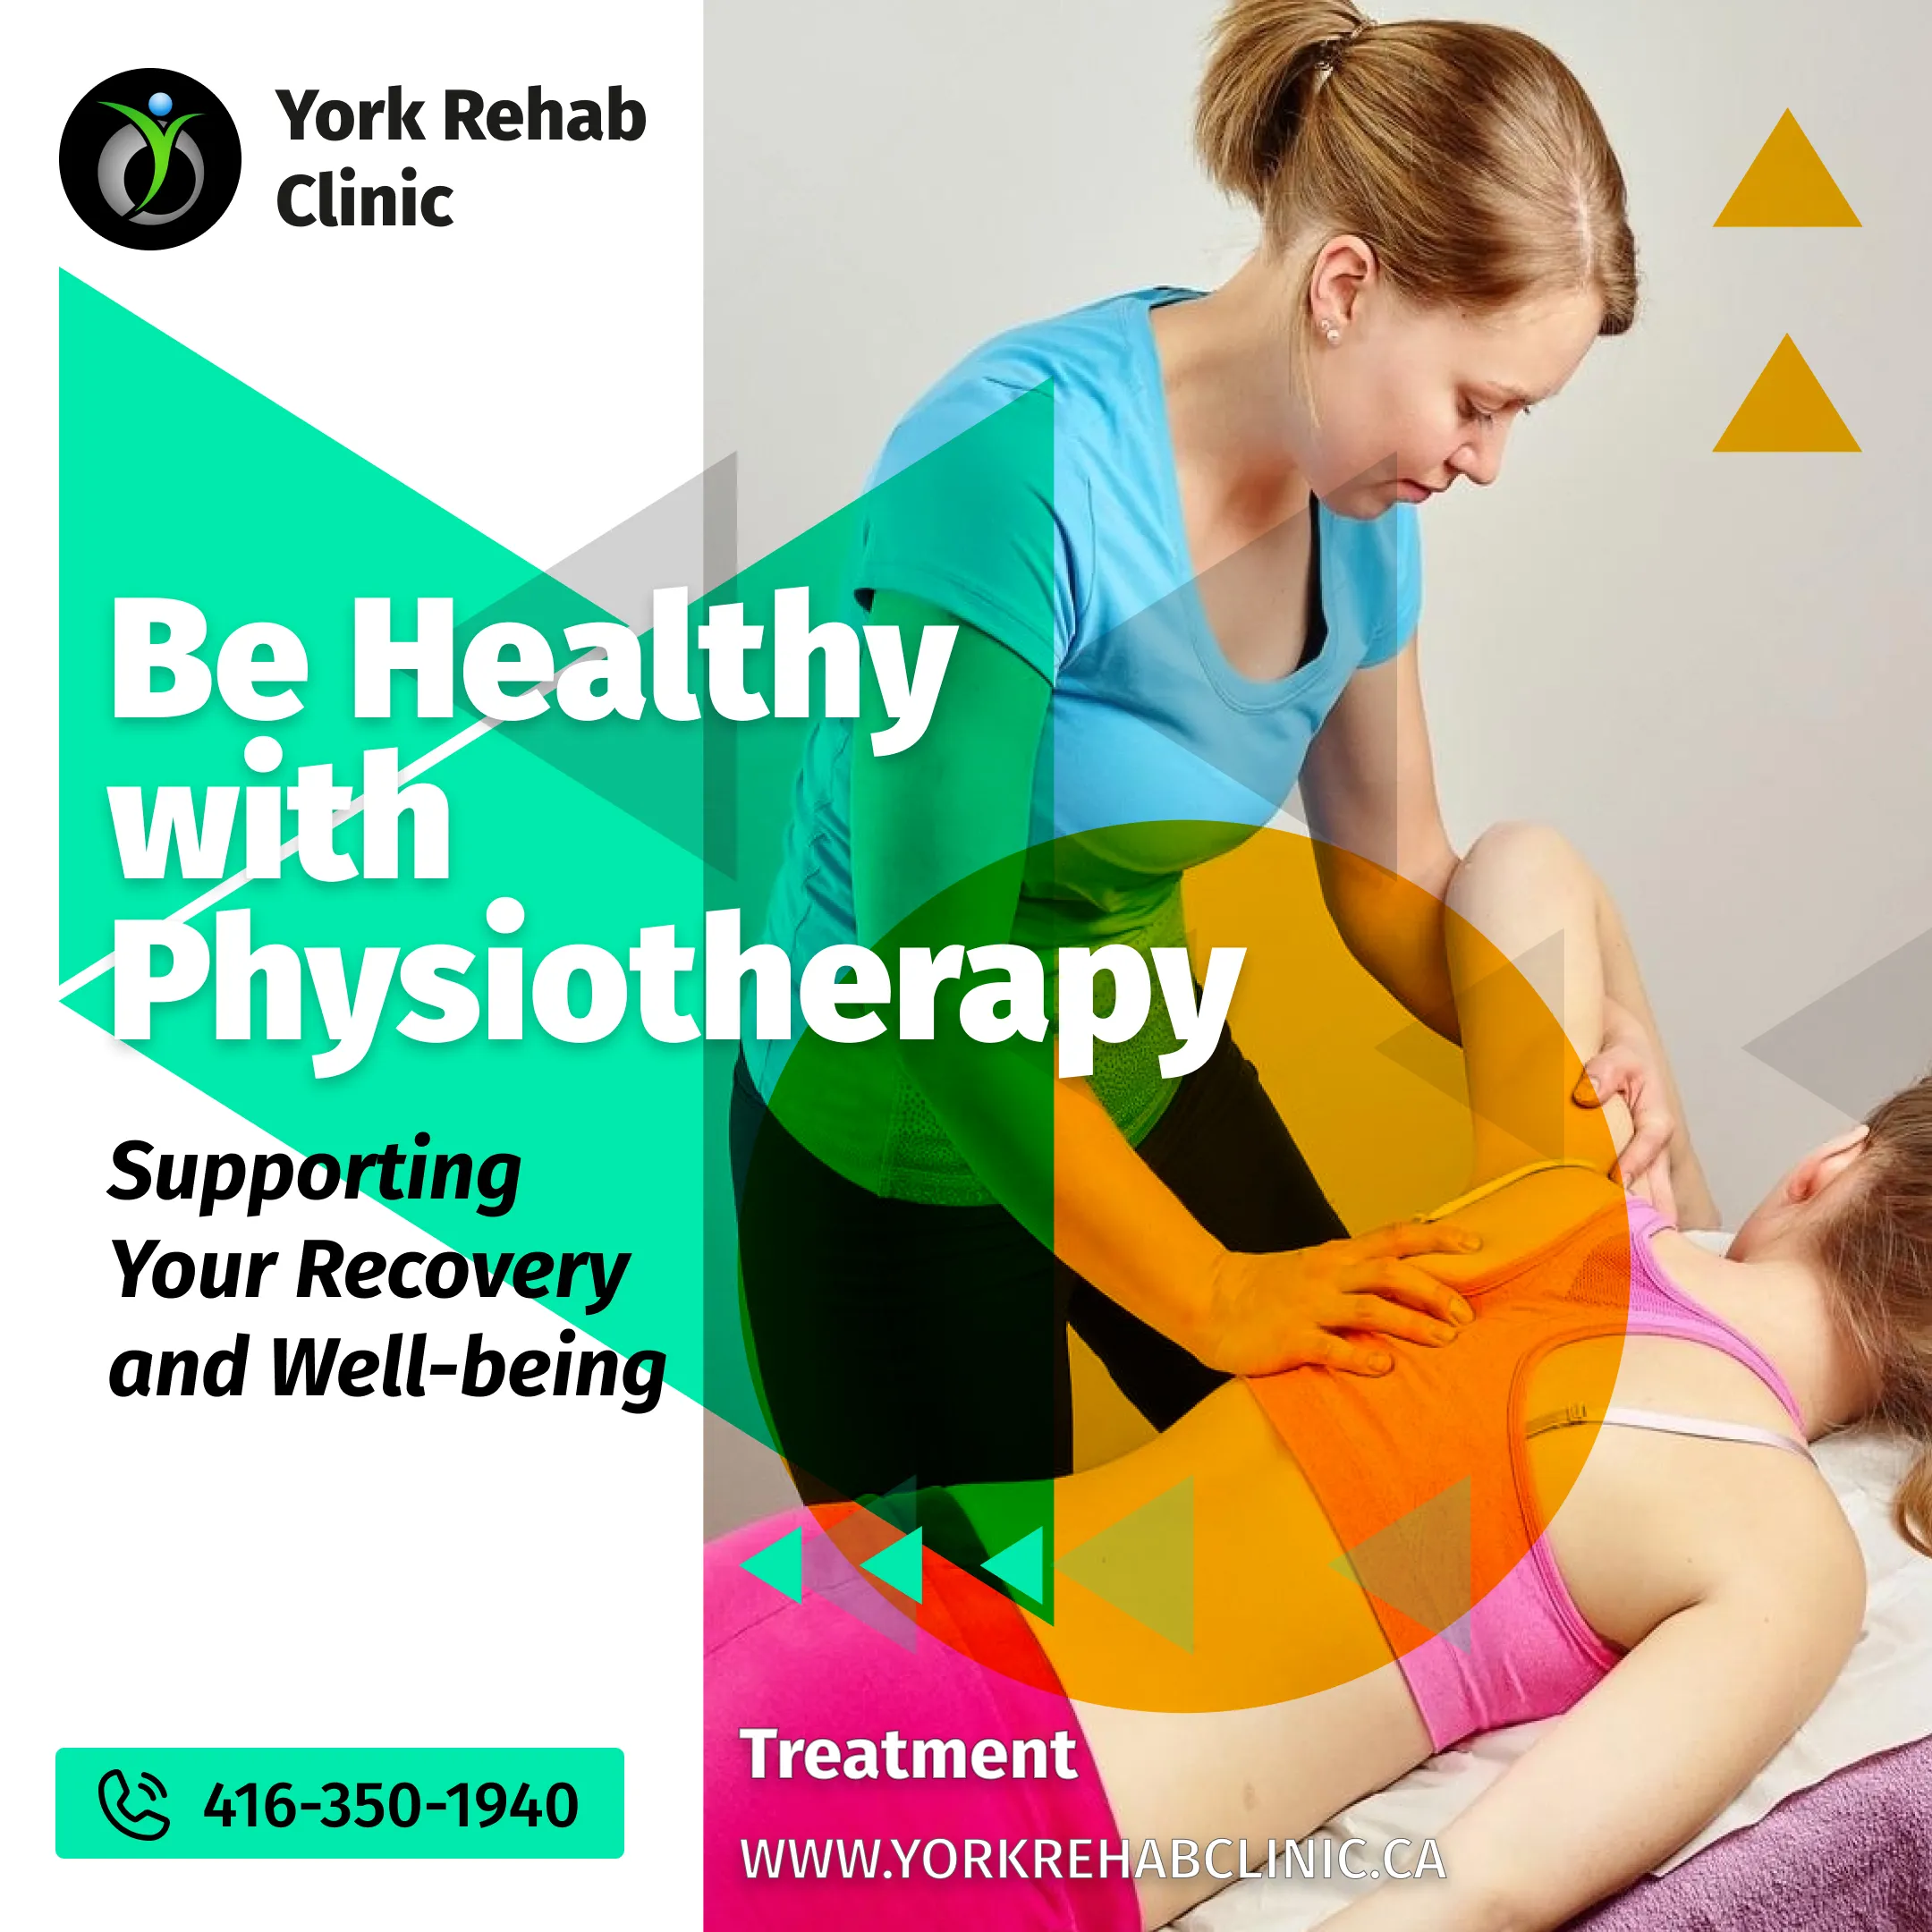 Revitalize Your Physical Function and Improve Your Quality of Life with Physiotherapy